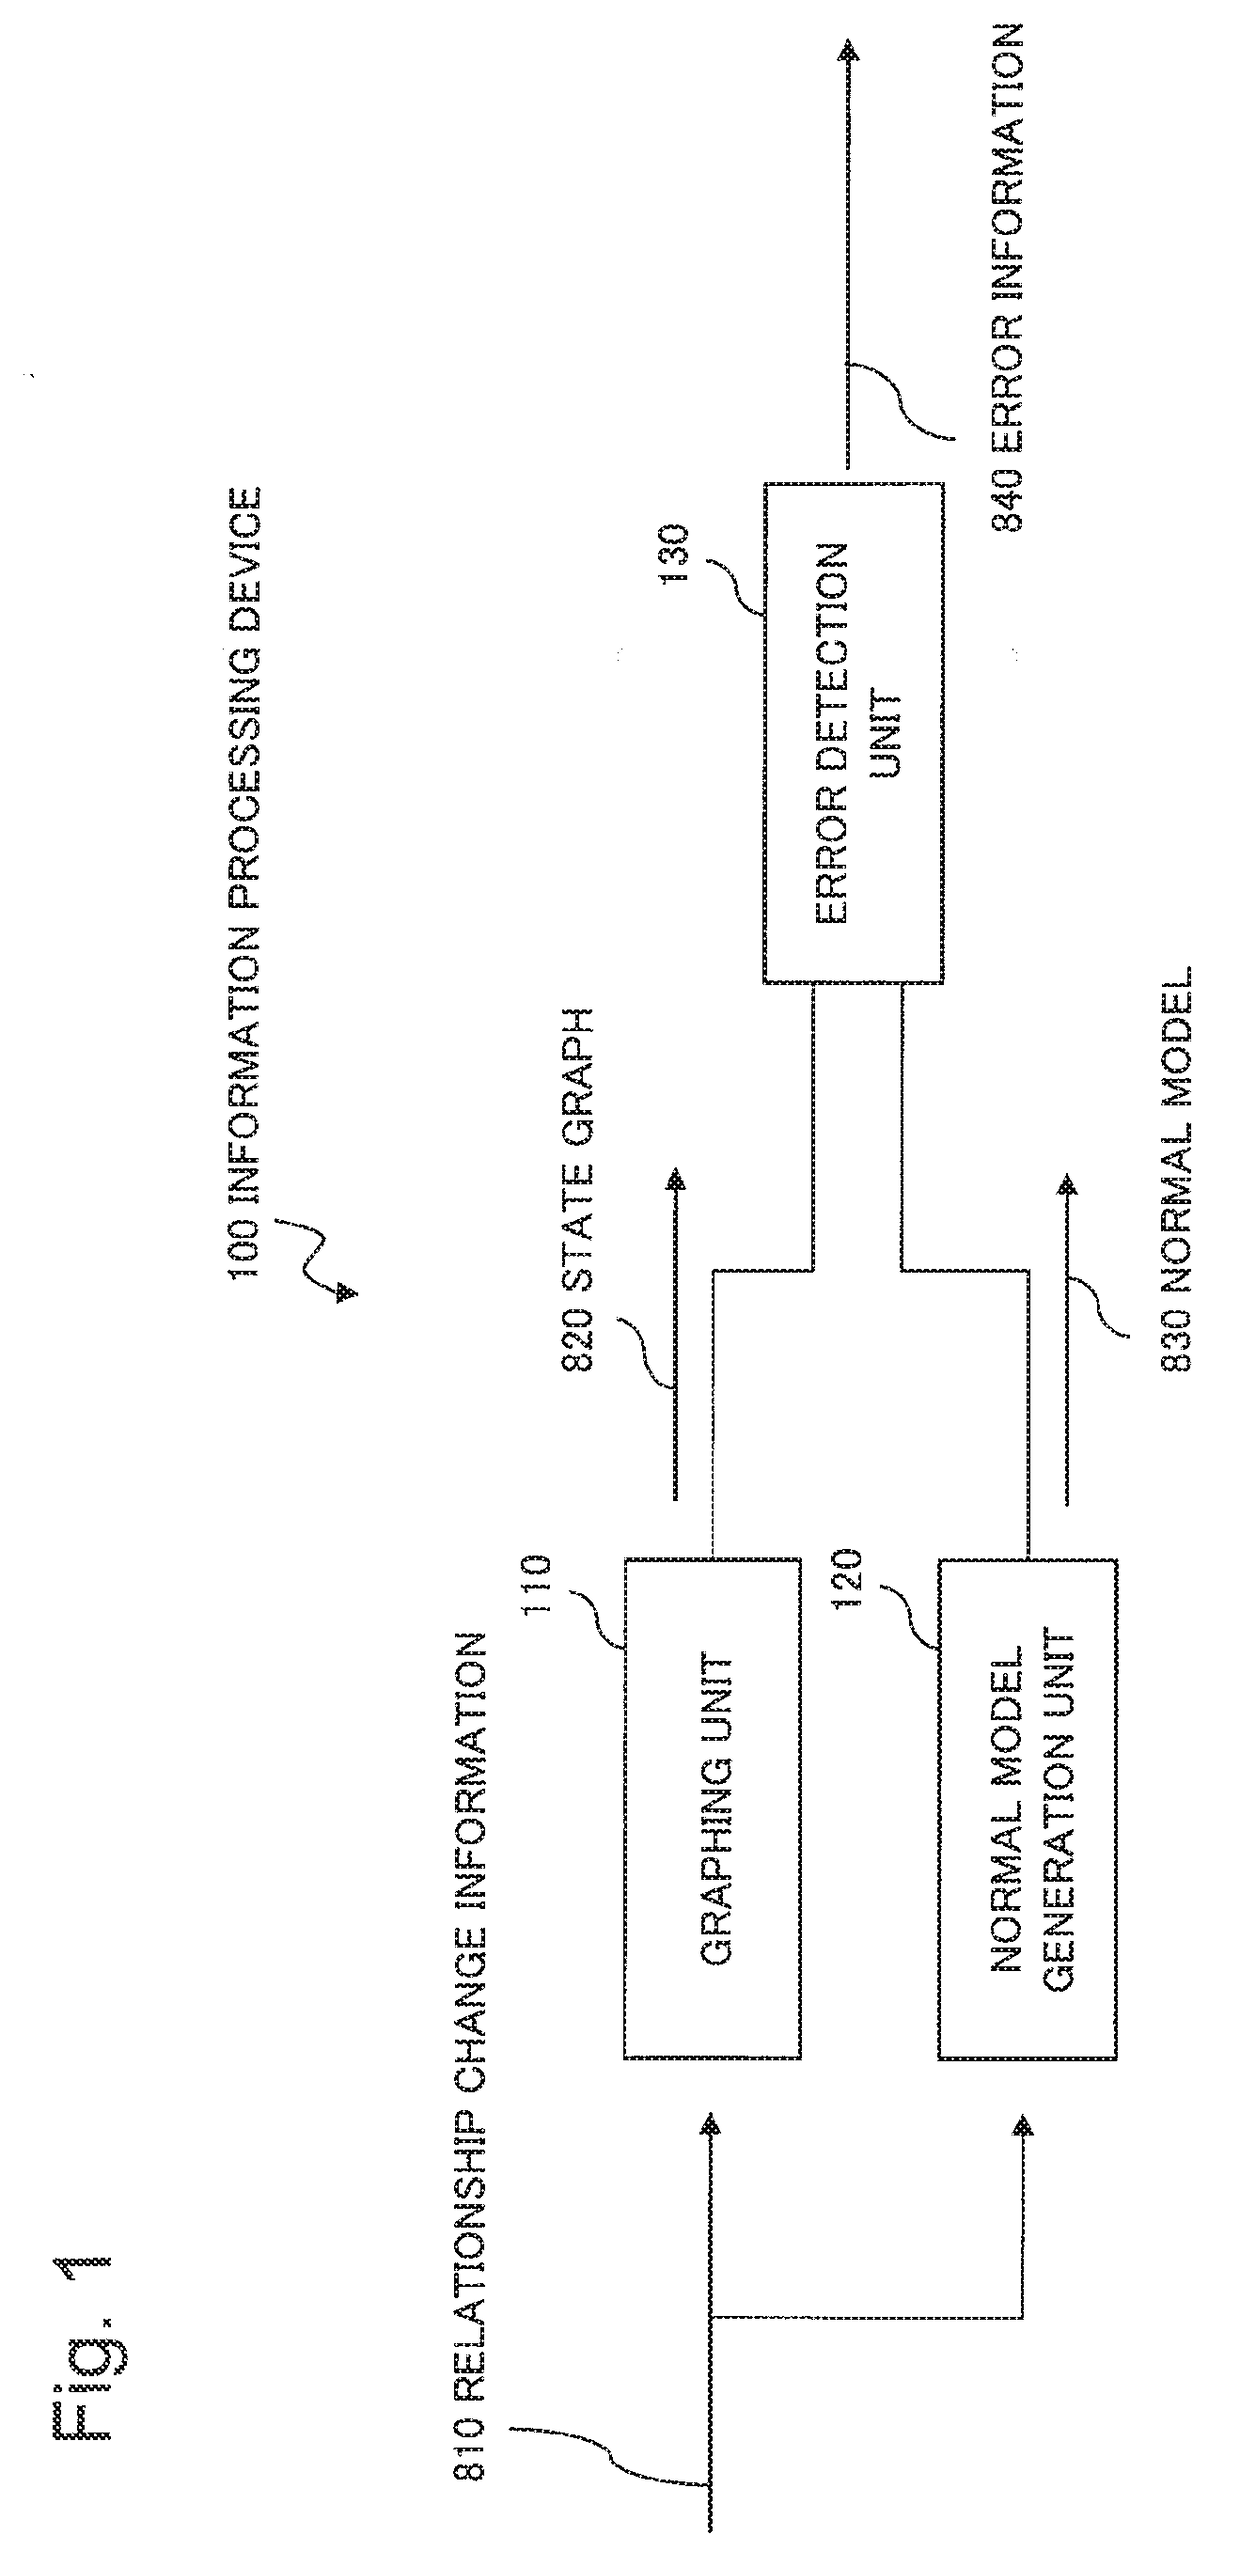 Information processing device and error detection method